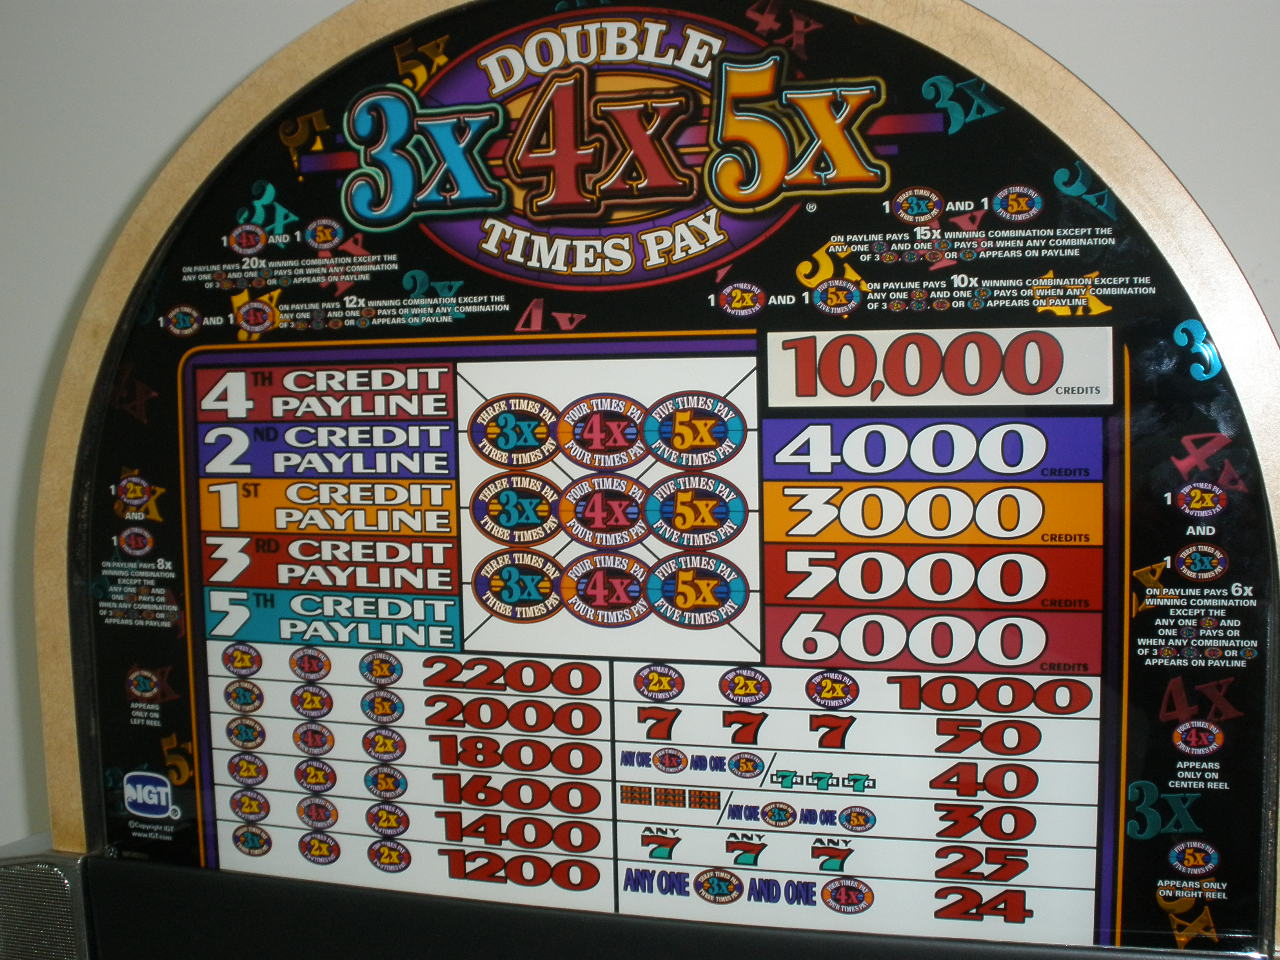 IGT DOUBLE 3X 4X 5X TIMES PAY FIVE LINE S2000 SLOT MACHINE For Sale